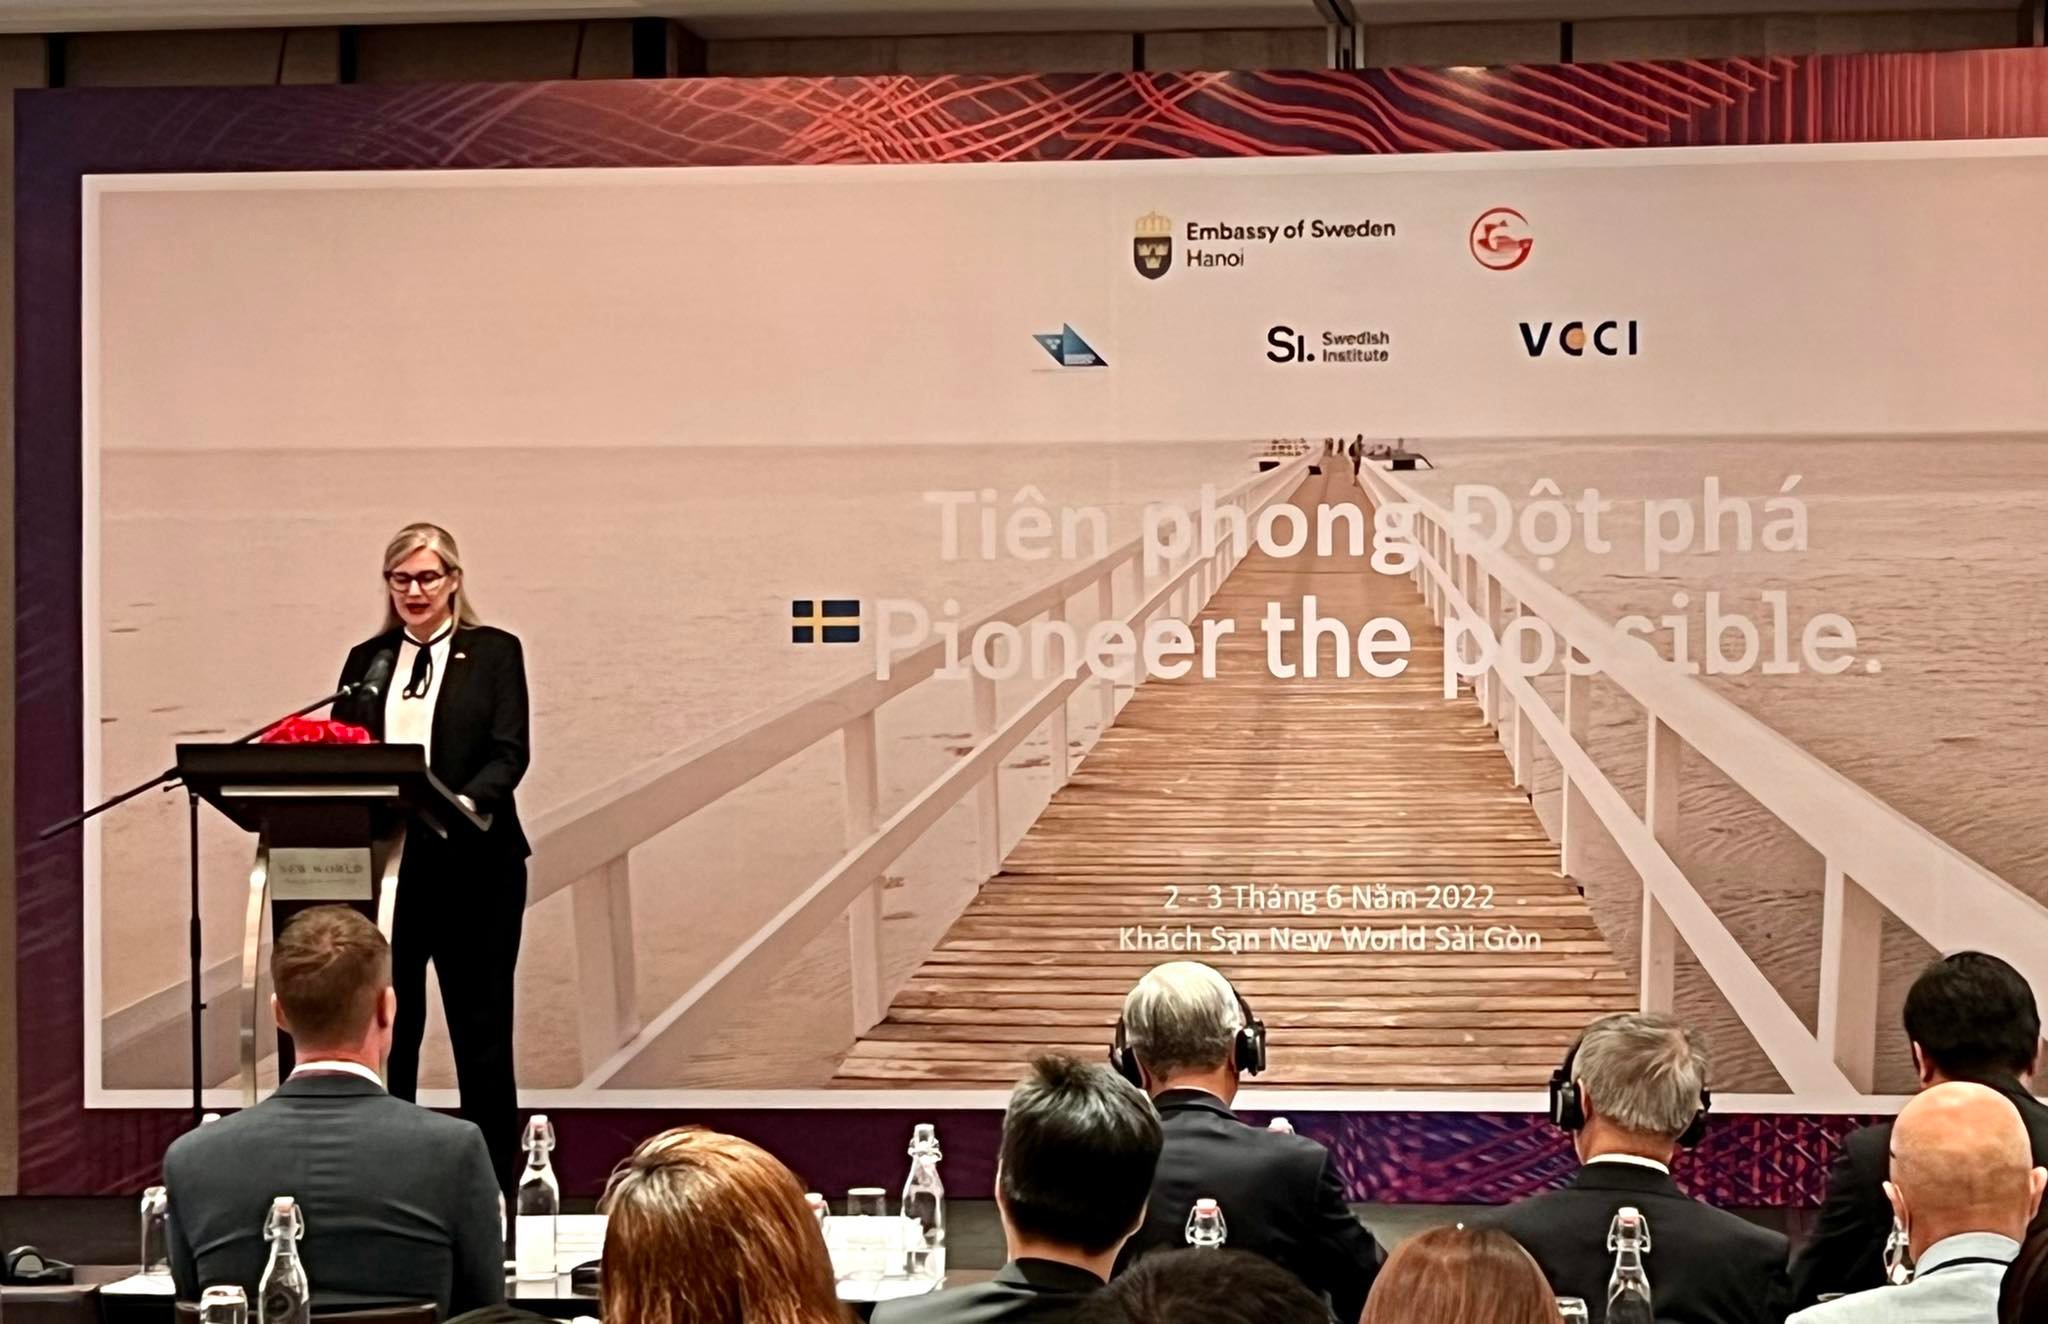 Swedish Ambassador to Vietnam Ann Måwe delivers an opening speech at the ‘Pioneer the Possible’ program in Ho Chi Minh City, June 2, 2022. Photo: Duy Khang / Tuoi Tre